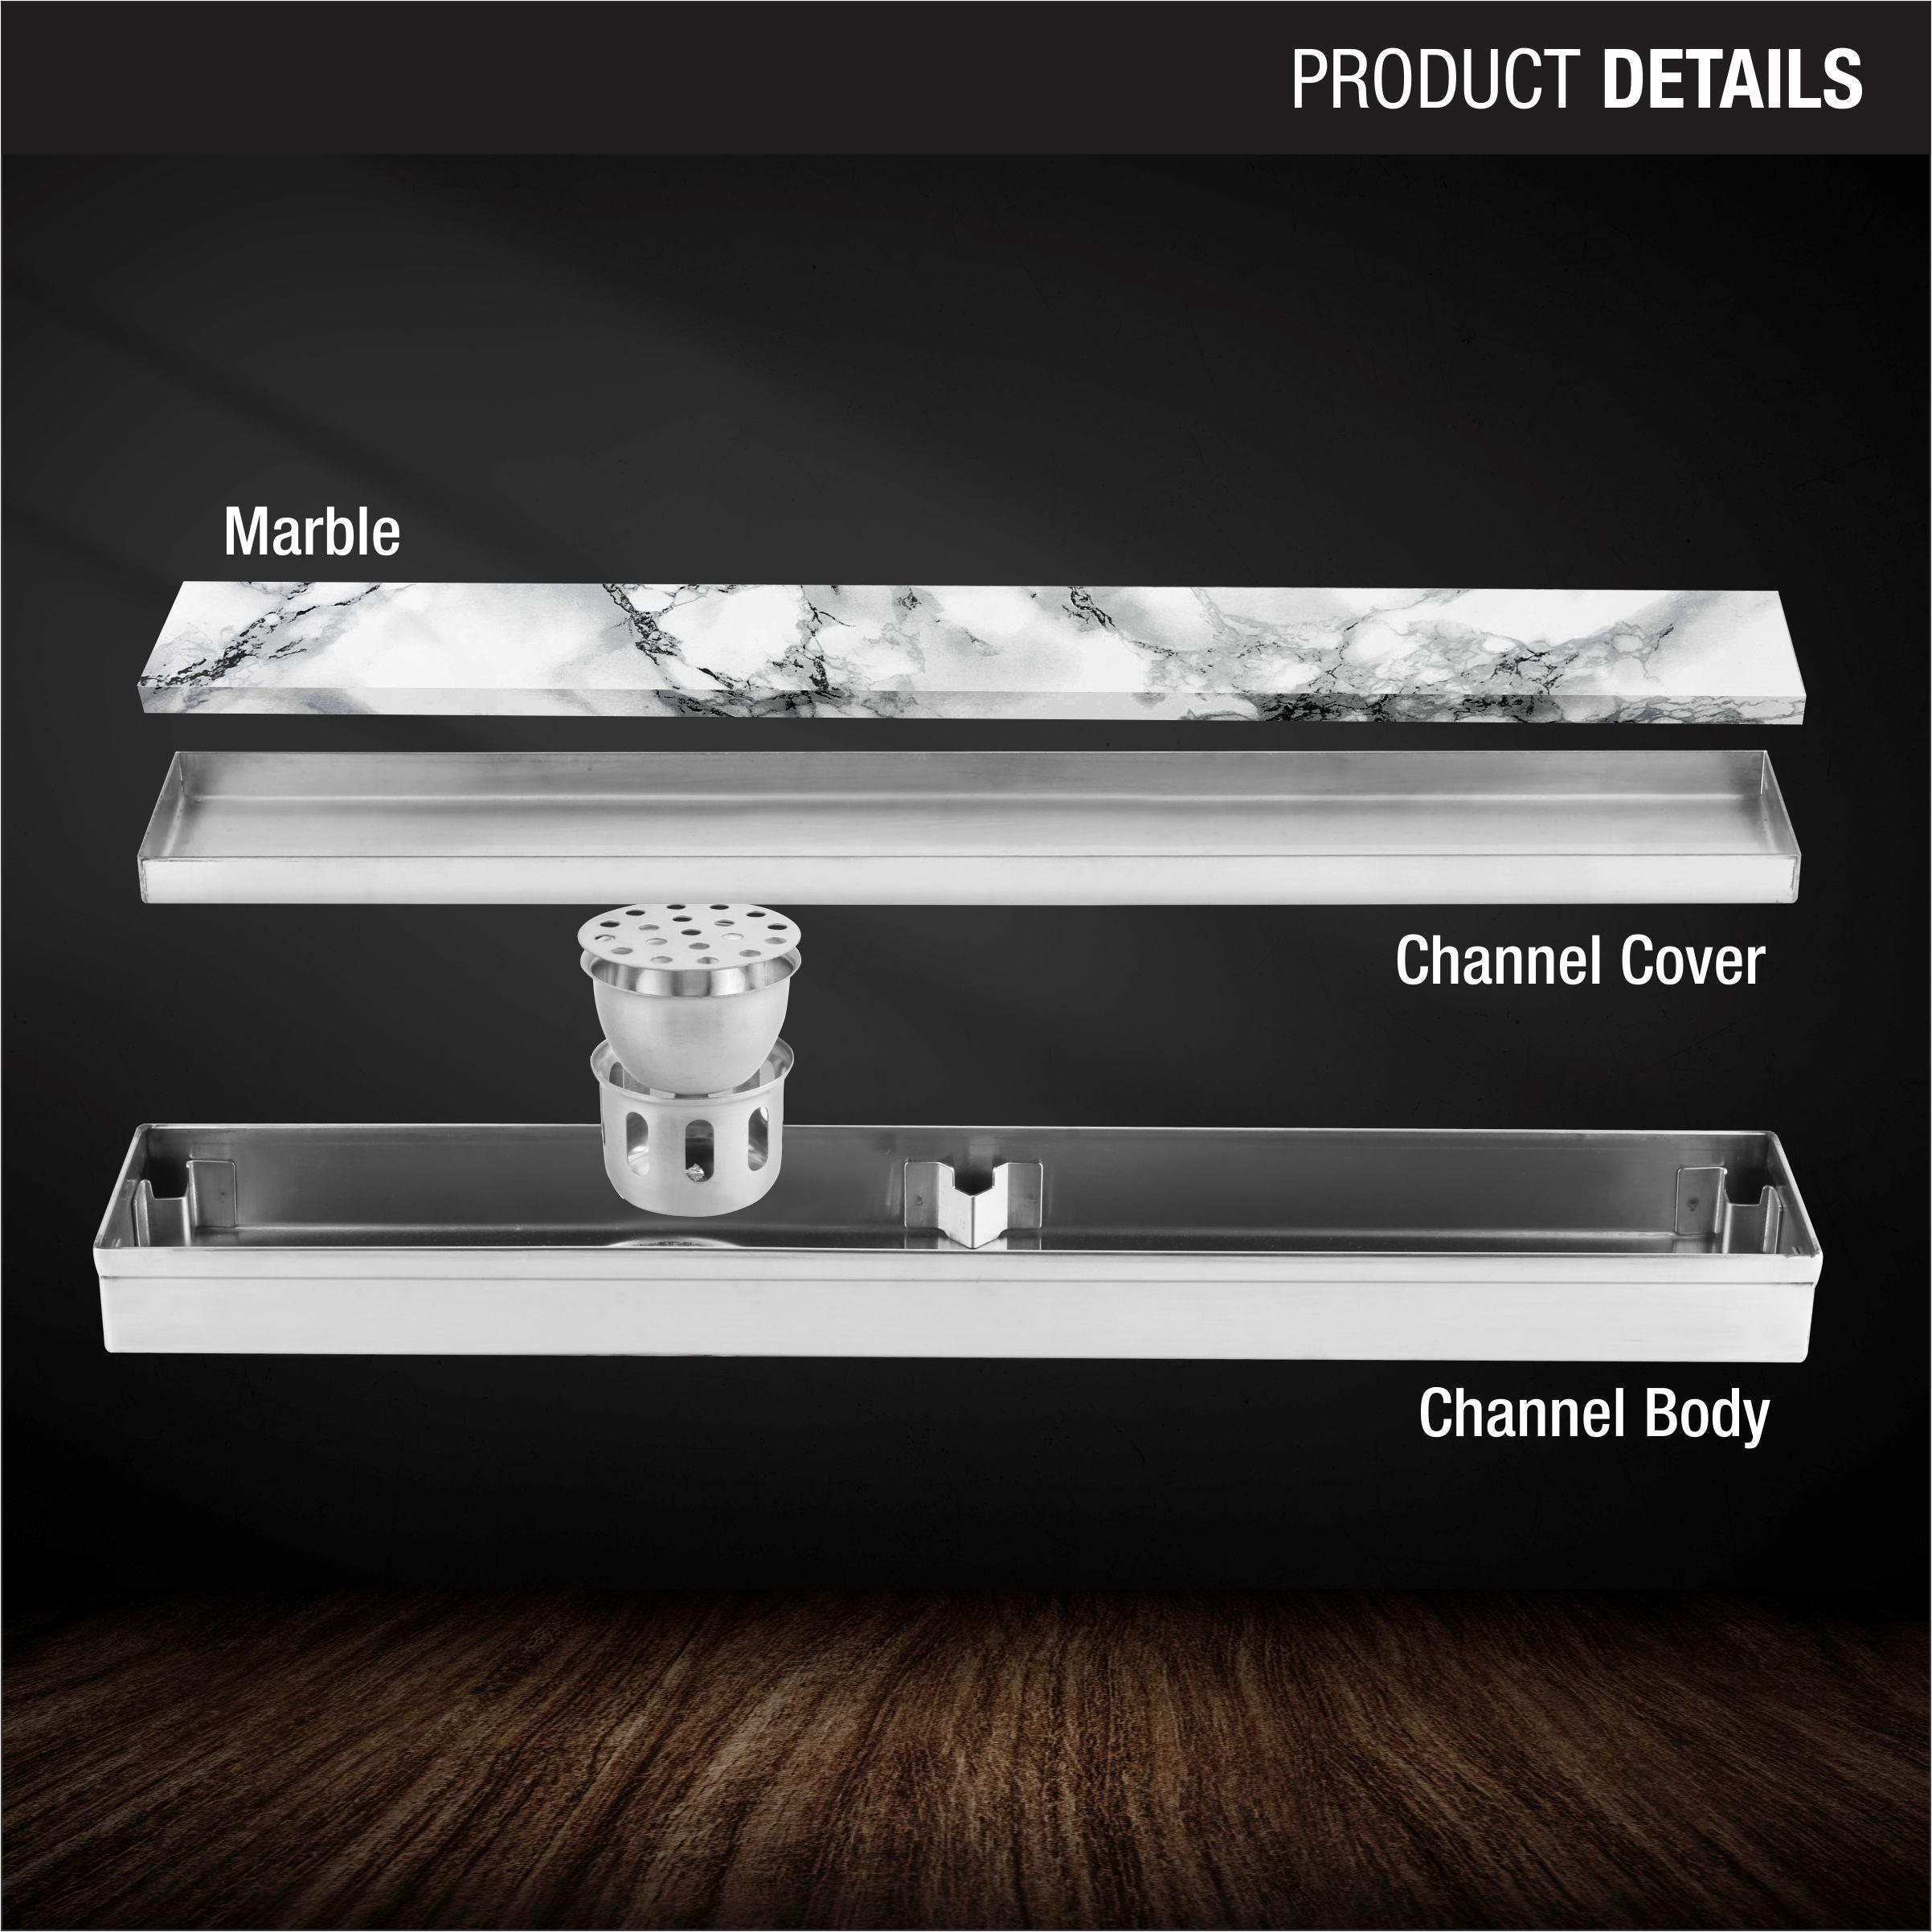 Marble Insert Shower Drain Channel (36 x 4 Inches) product details